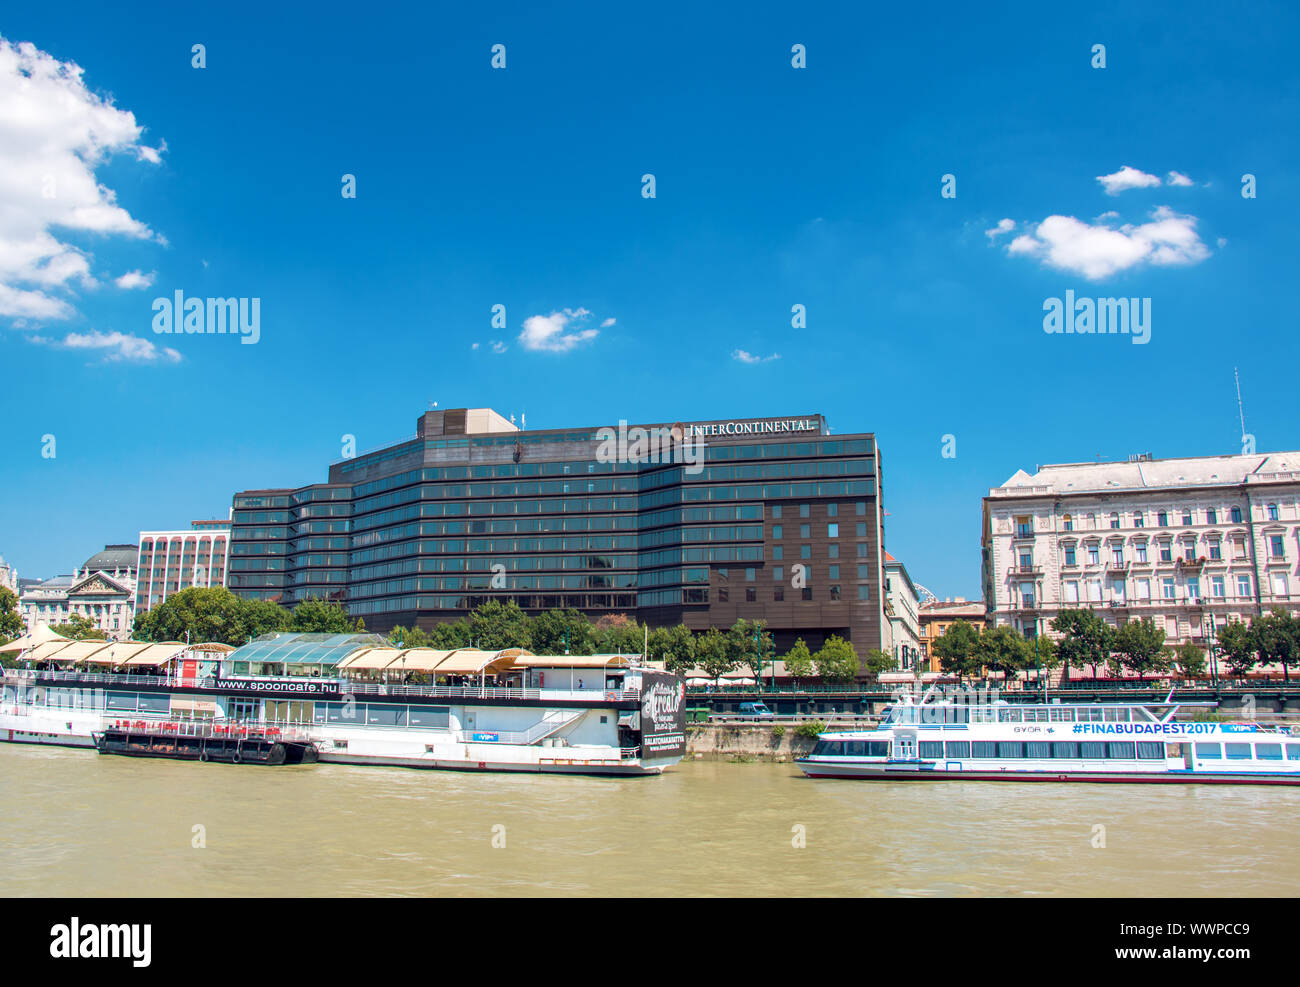 BUDAPEST, HUNGARY - AUGUST, 01, 2017: Hotel intercontinental in Budapest, Hungary at summer Stock Photo